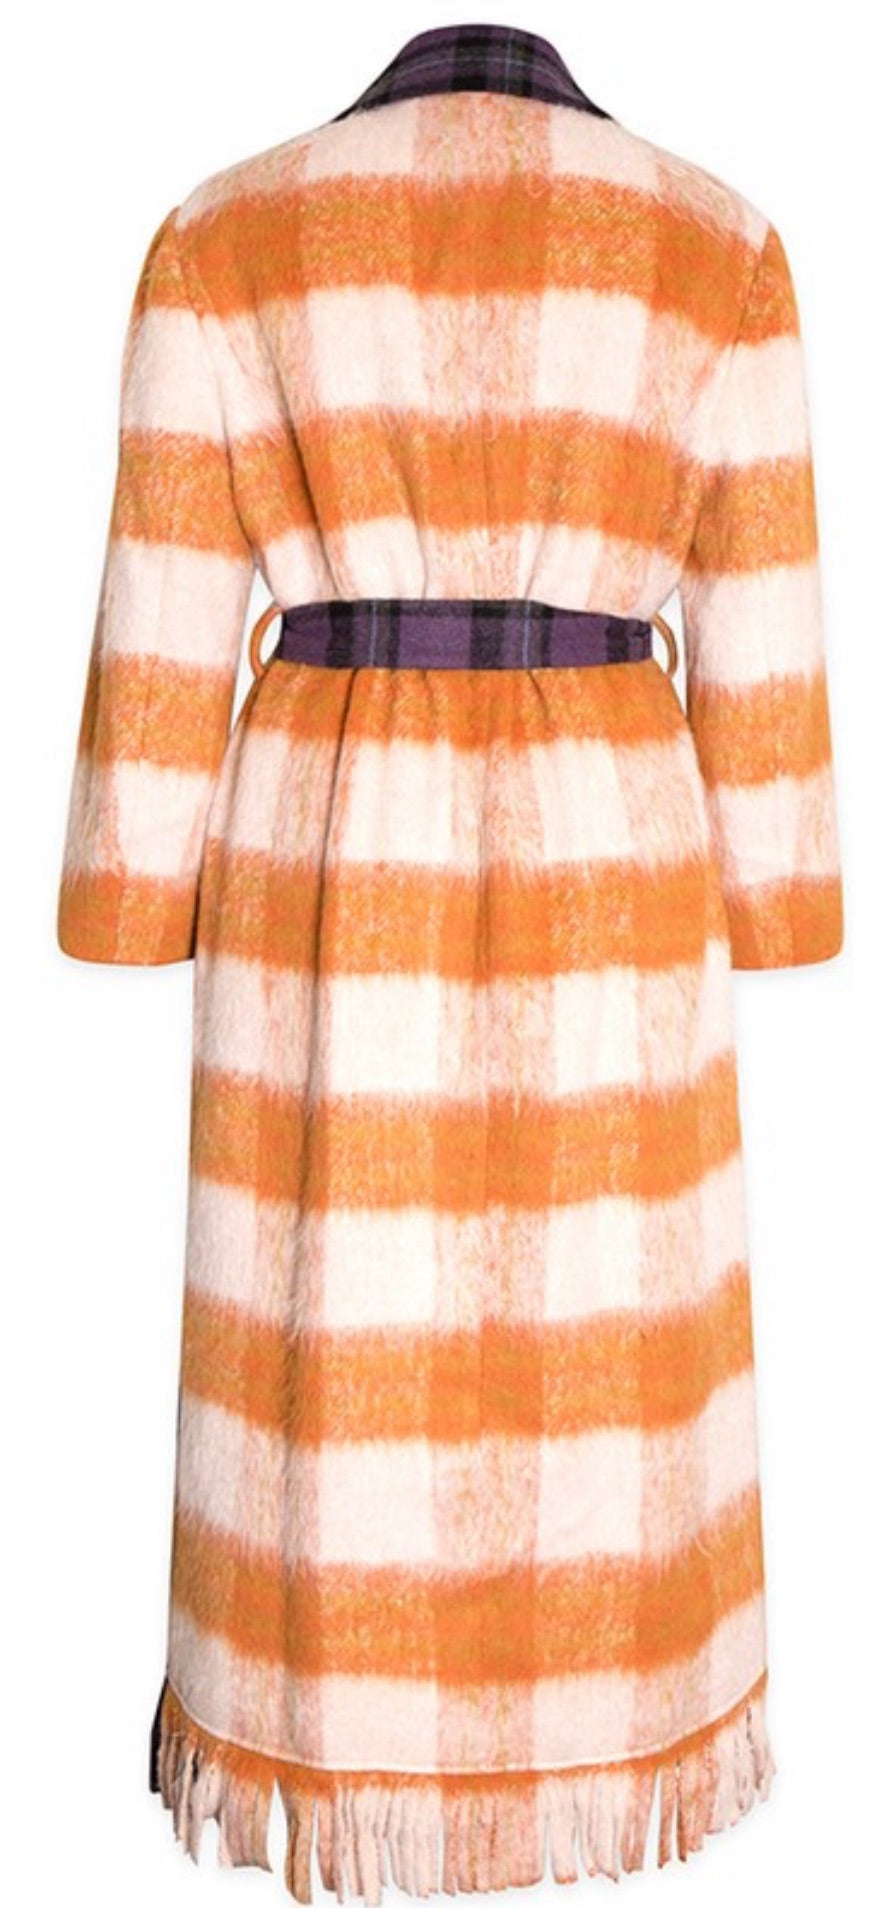 Unmatched Plaid Wool Trench Coat